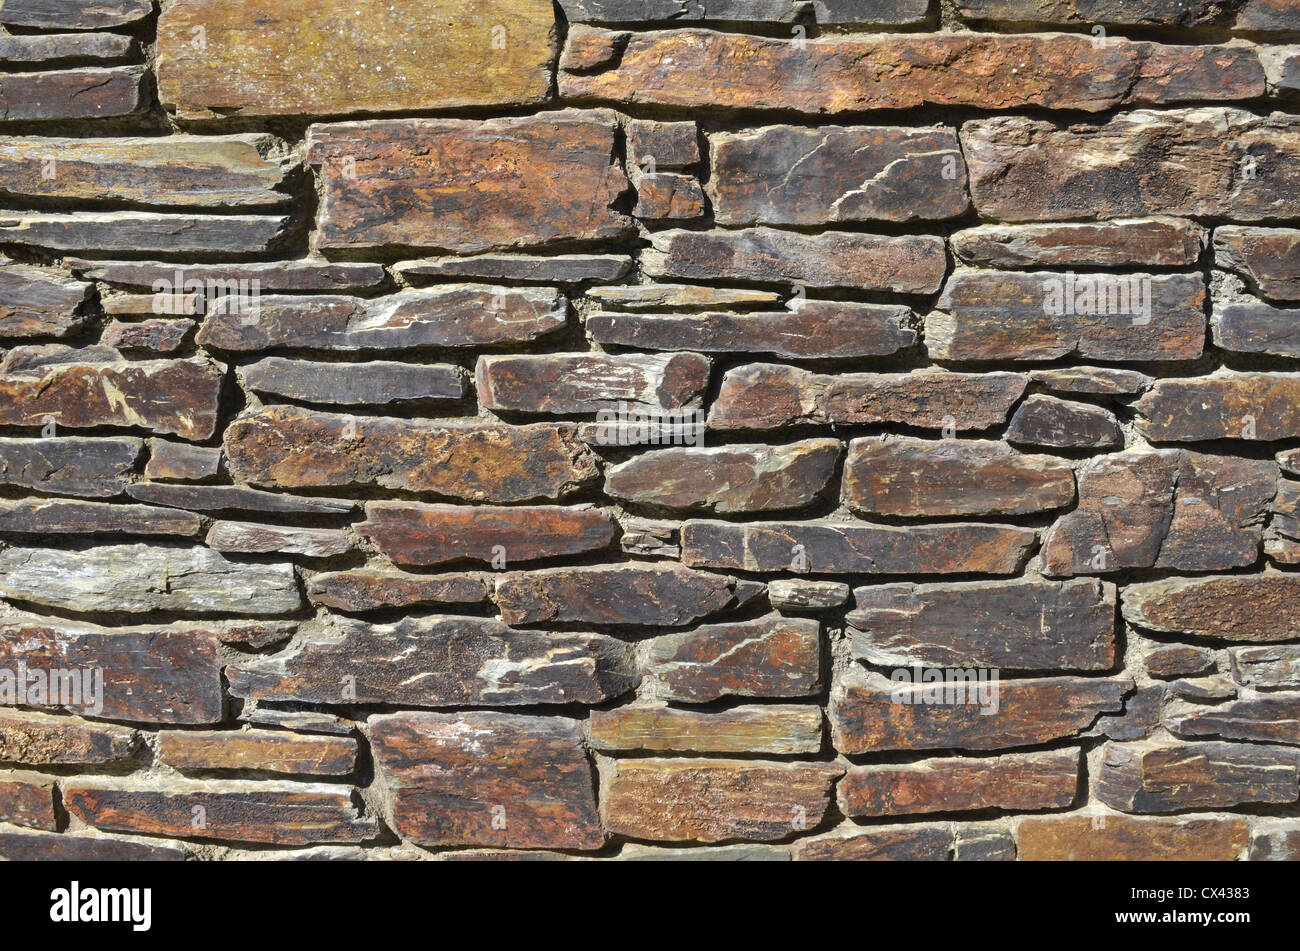 Denial of access, computer security / firewall concept. Section of retaining garden wall. Cornwall. Irregular stonework. For UK construction sector. Stock Photo